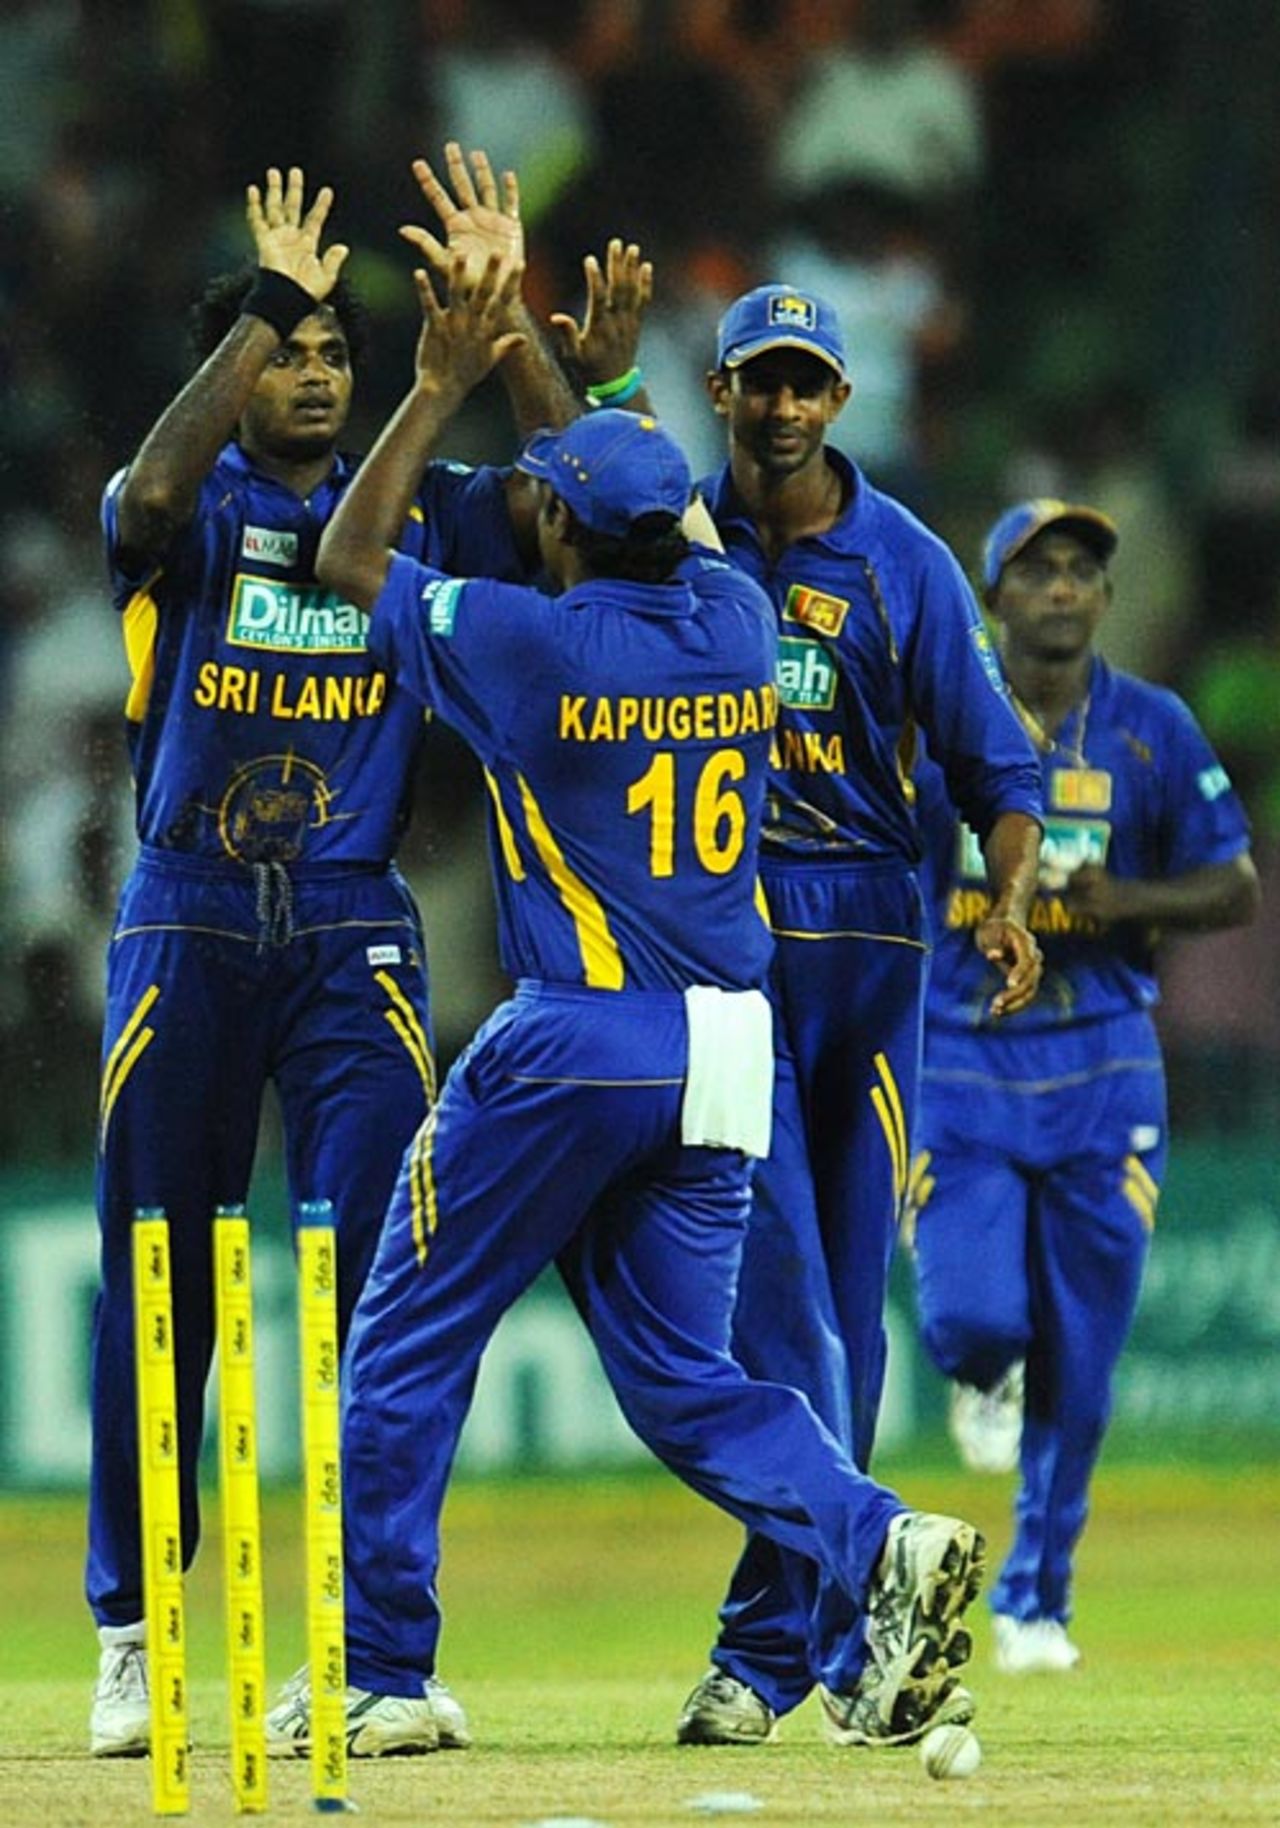 Team-mates congratulate Dilhara Fernando on picking up another wicket, Sri Lanka v India, 5th ODI, Colombo, August 29, 2008 
